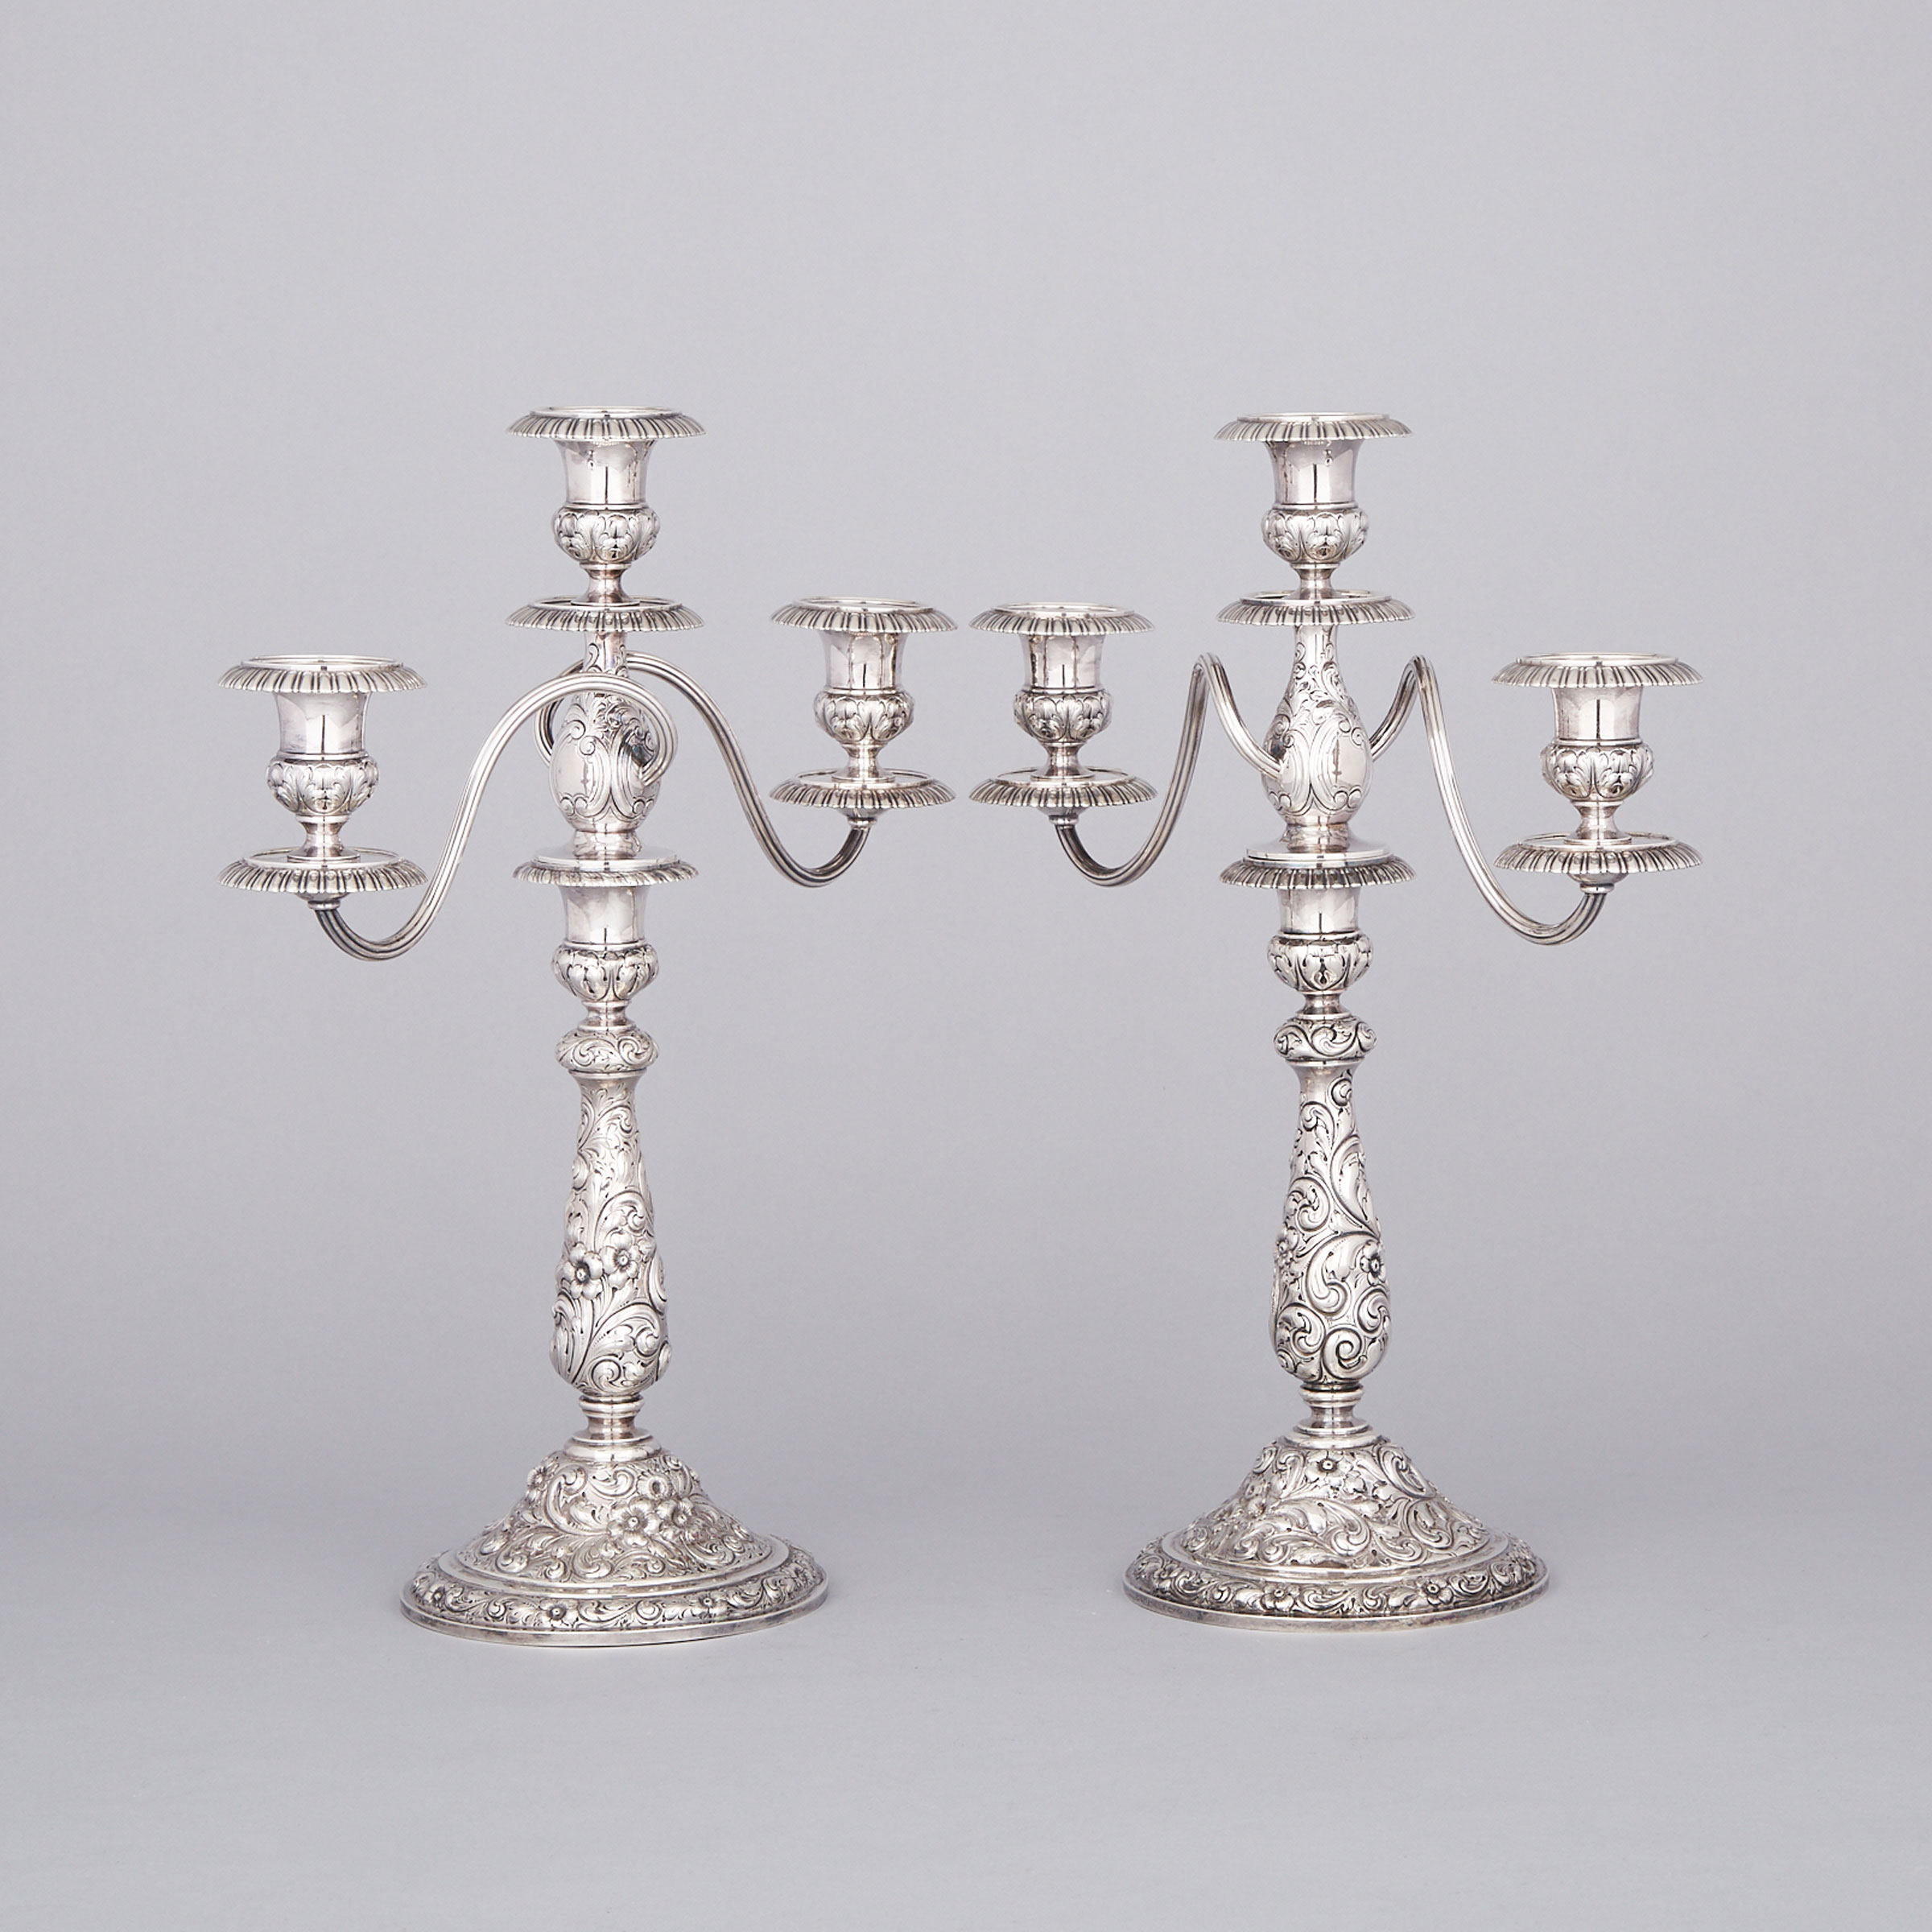 Pair of American Silver Three-Light Candelabra, Dominick & Haff for Shreve, Crump & Low of Boston, New York, N.Y., late 19th century